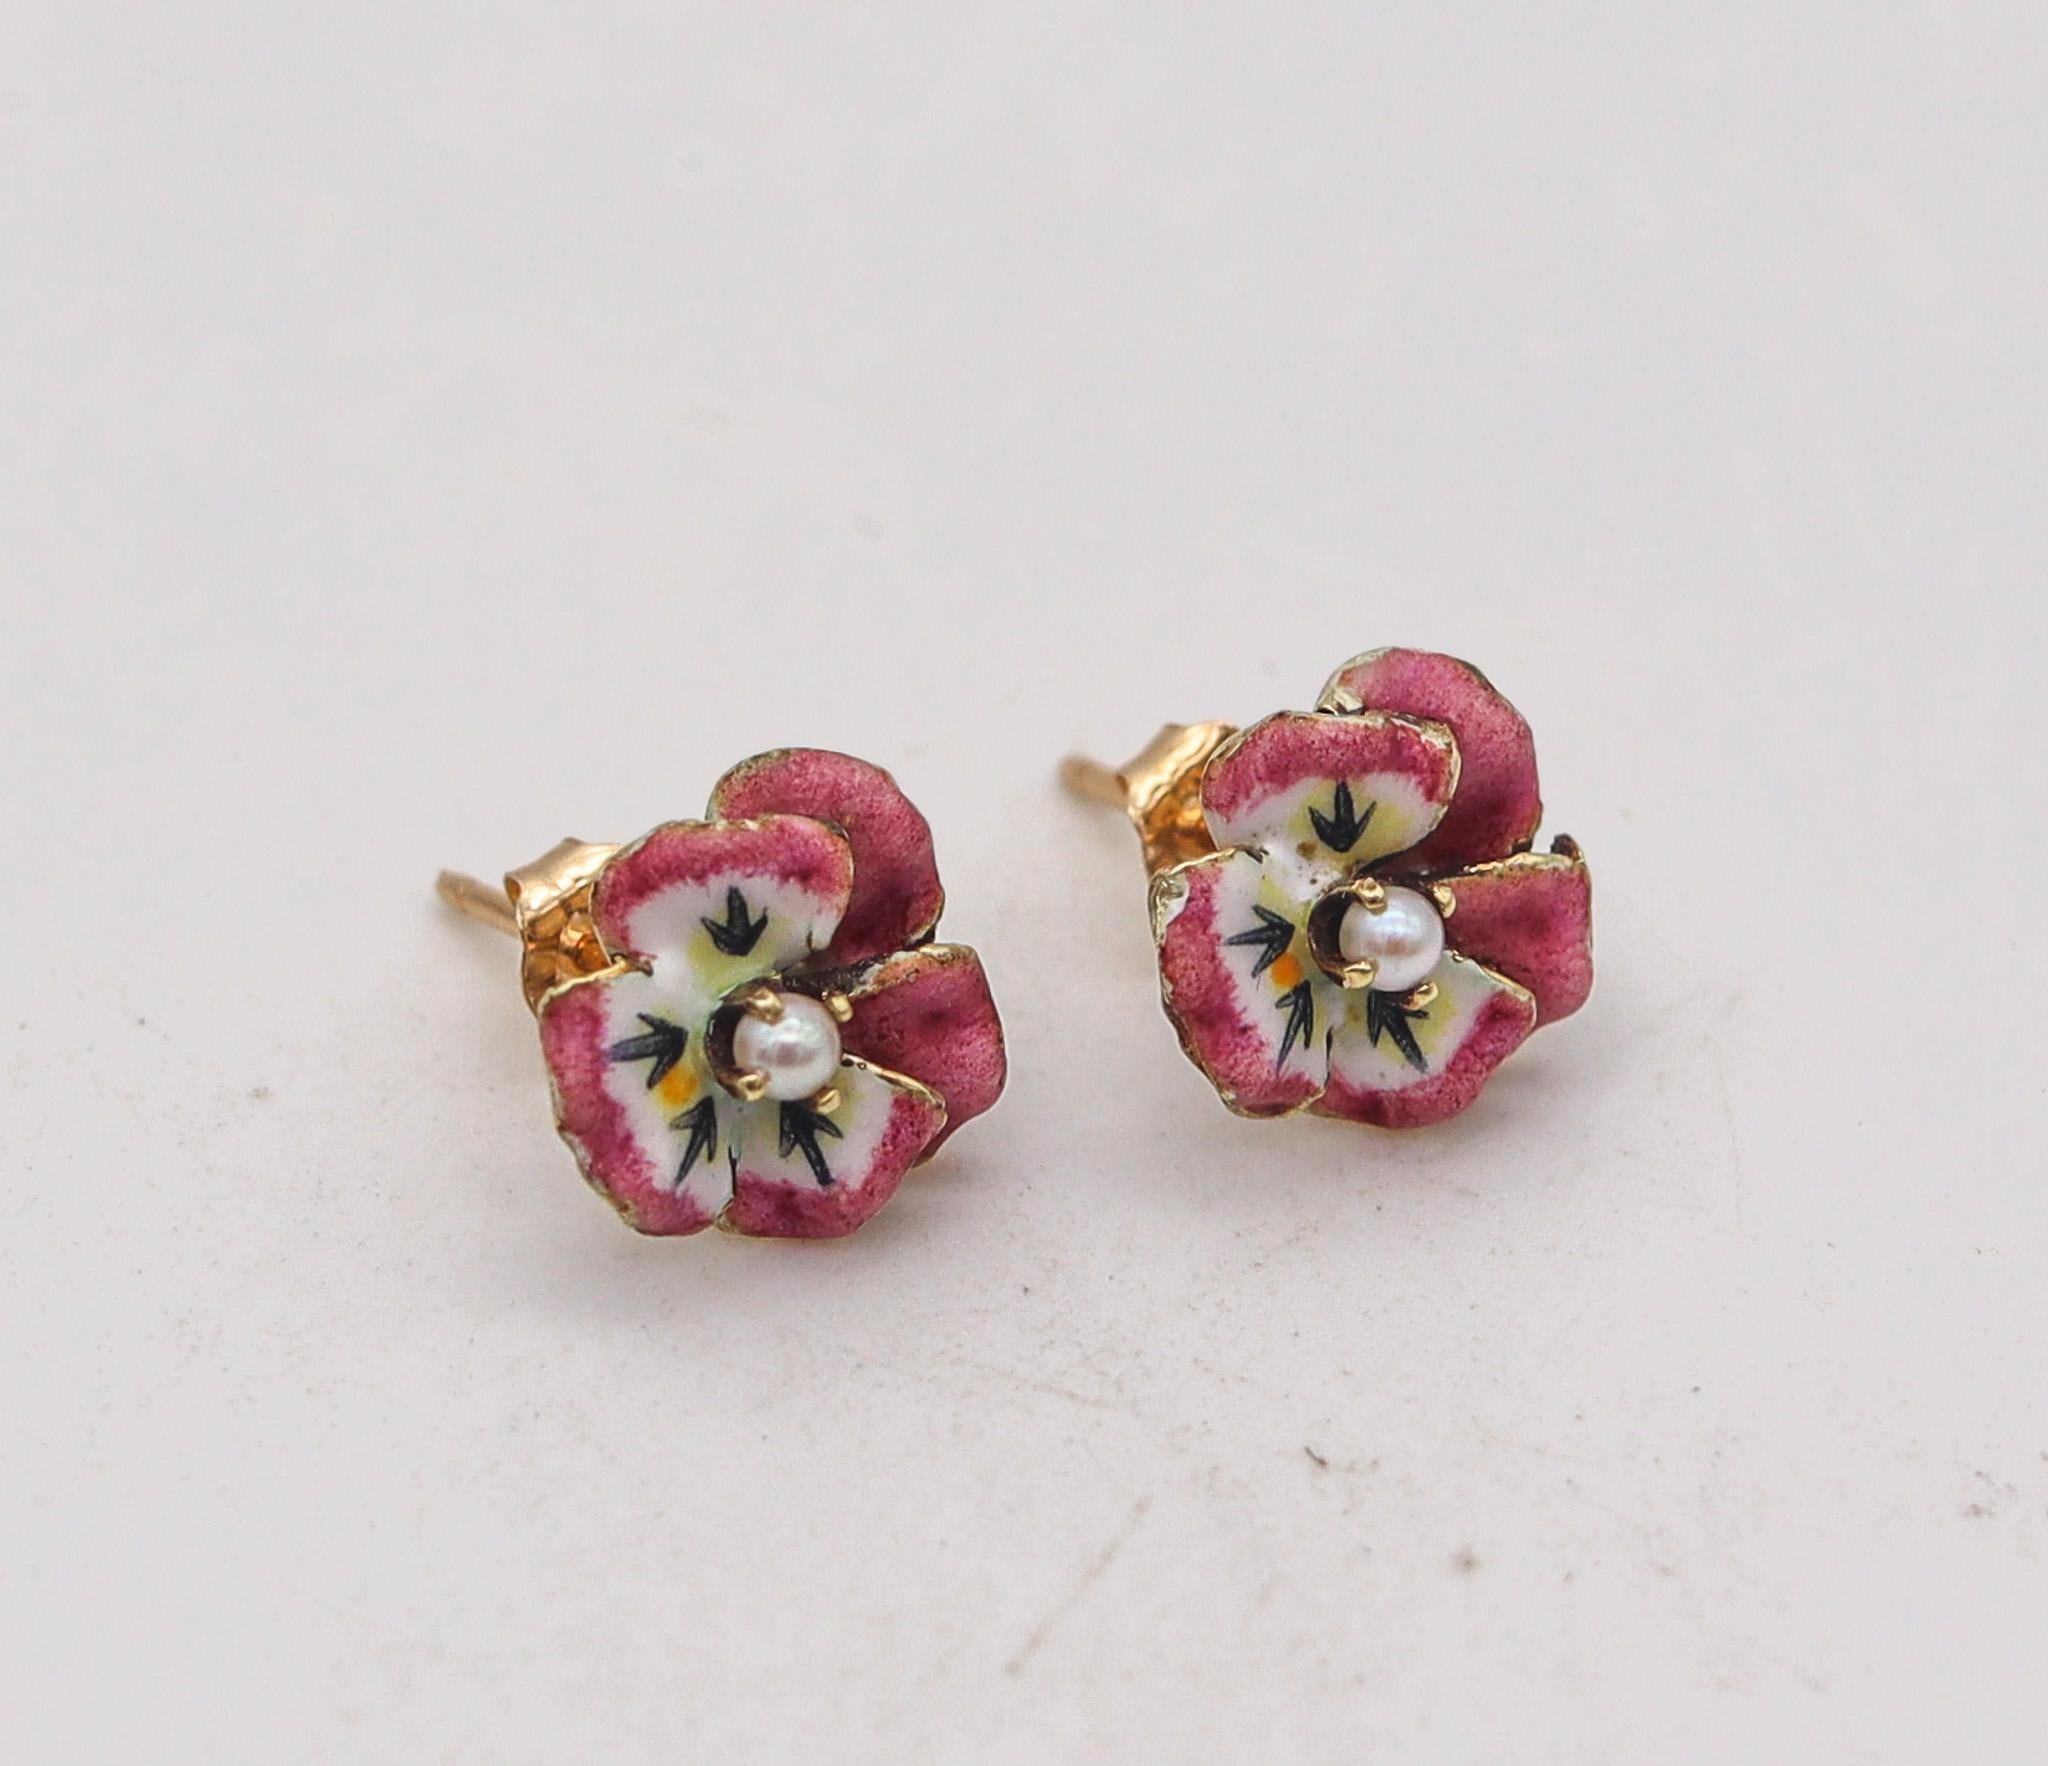 Art nouveau Pansy flower earrings designed by A.J. Hedge & Co.

Beautiful colorful pair of earrings, created in America during the Edwardian and the Art Nouveau periods, back in the 1905. These unique earrings has been carefully crafted by A.J.